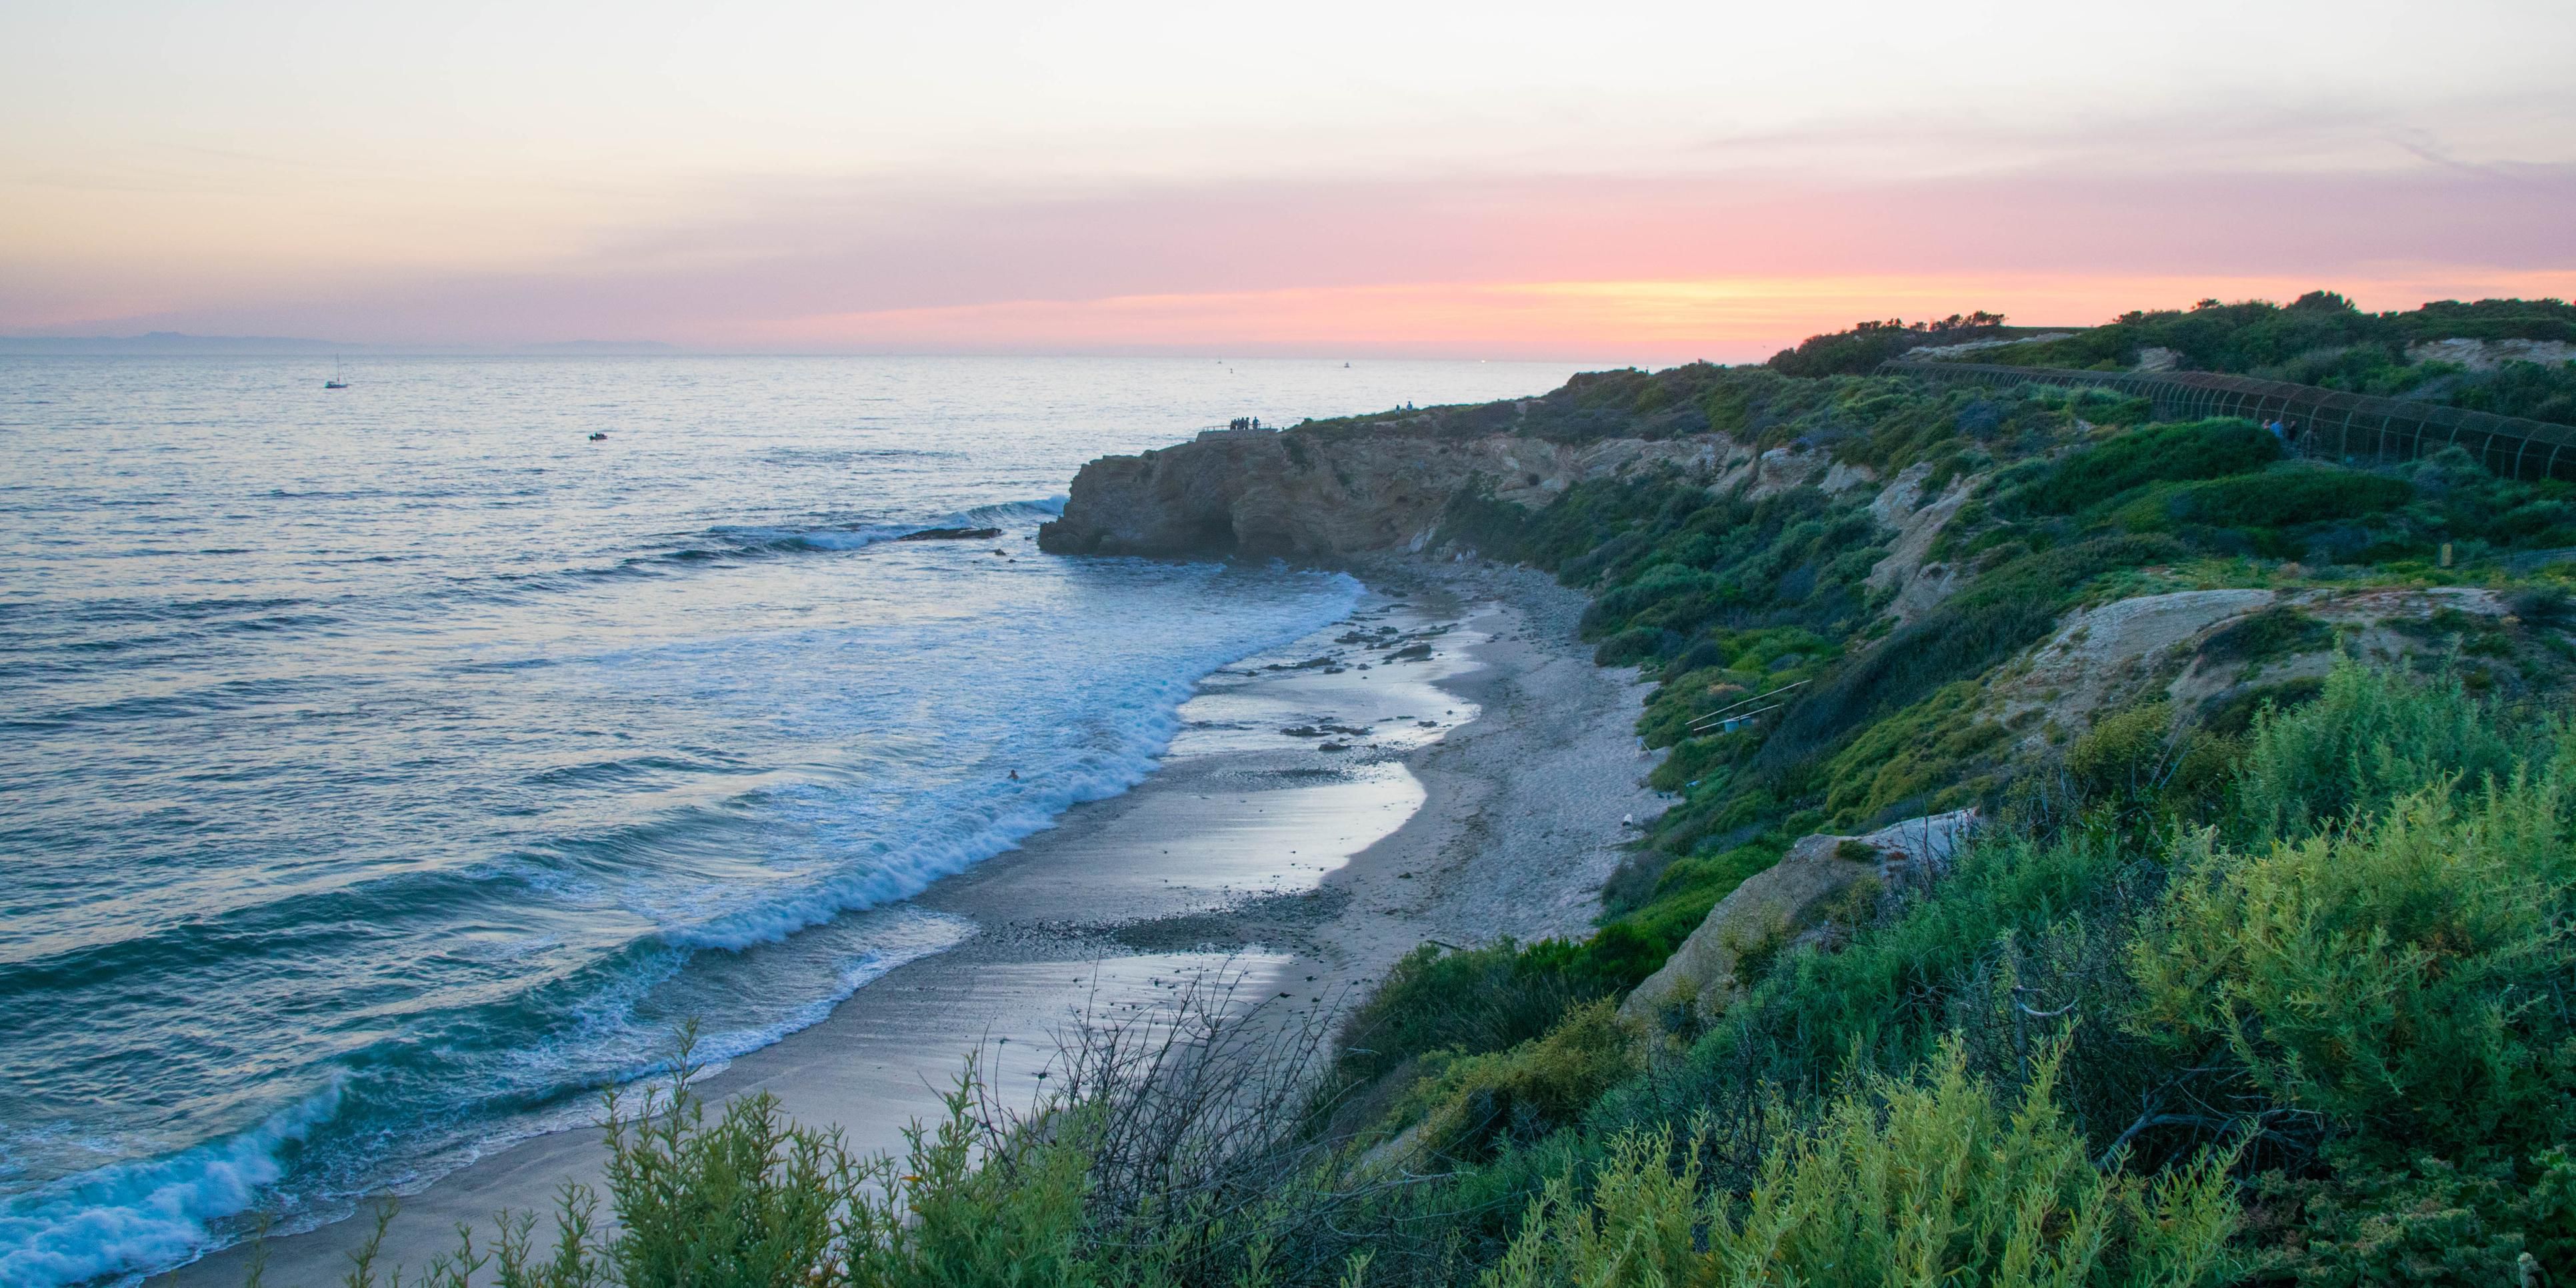 Take a drive over to Crystal Cove State Park and State Beach while you’re in town! Crystal Cove features 3 miles of beautiful beaches, tide pools, hiking trails, California wildlife, and more. Crystal Cove is located about 5 miles from the hotel and is the perfect spot for some outdoor activity.  